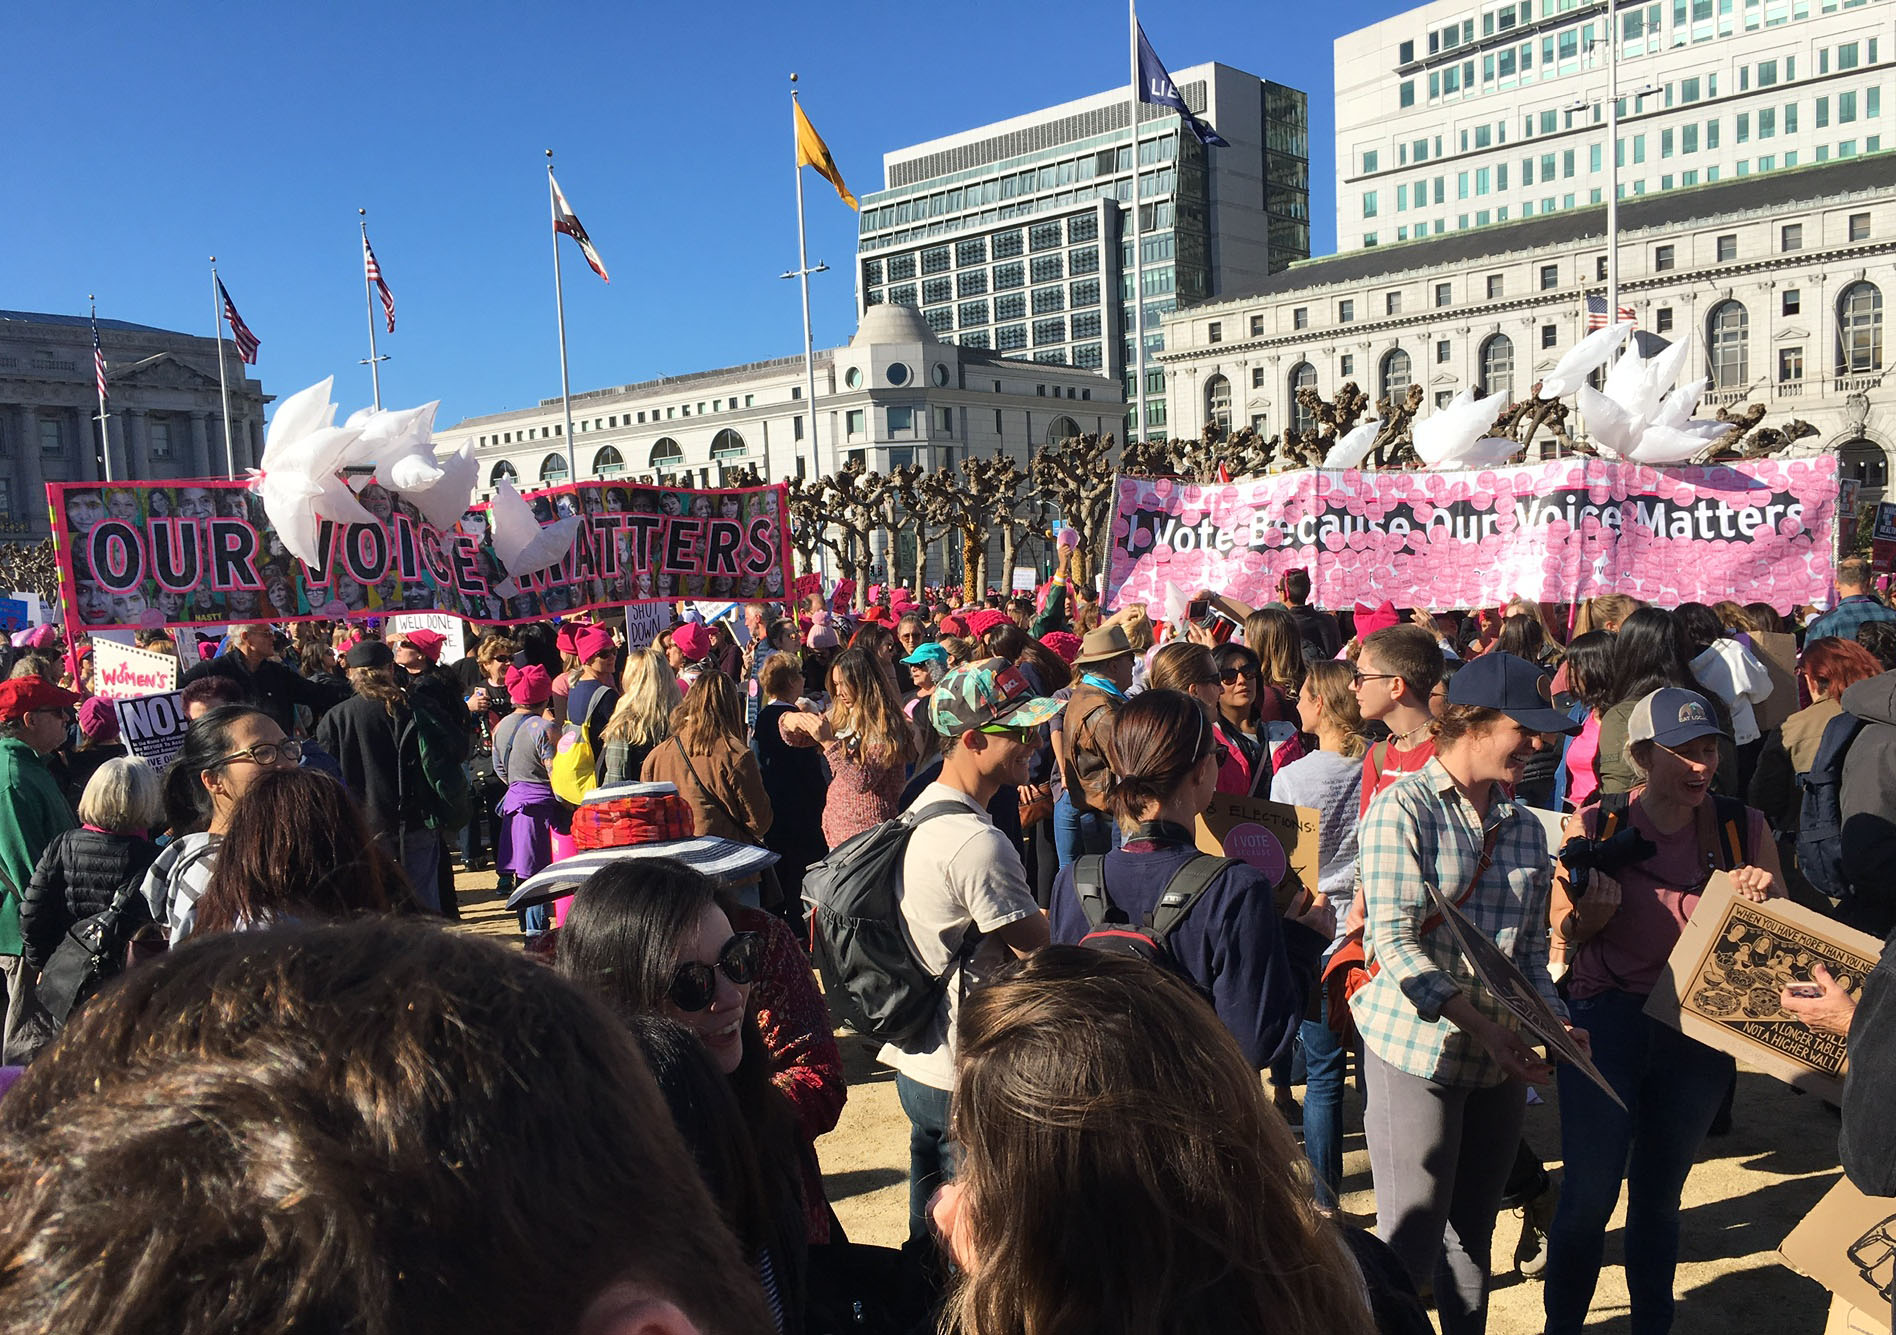 Two banners are held above a crowd of marchers in Civic Center Plaza